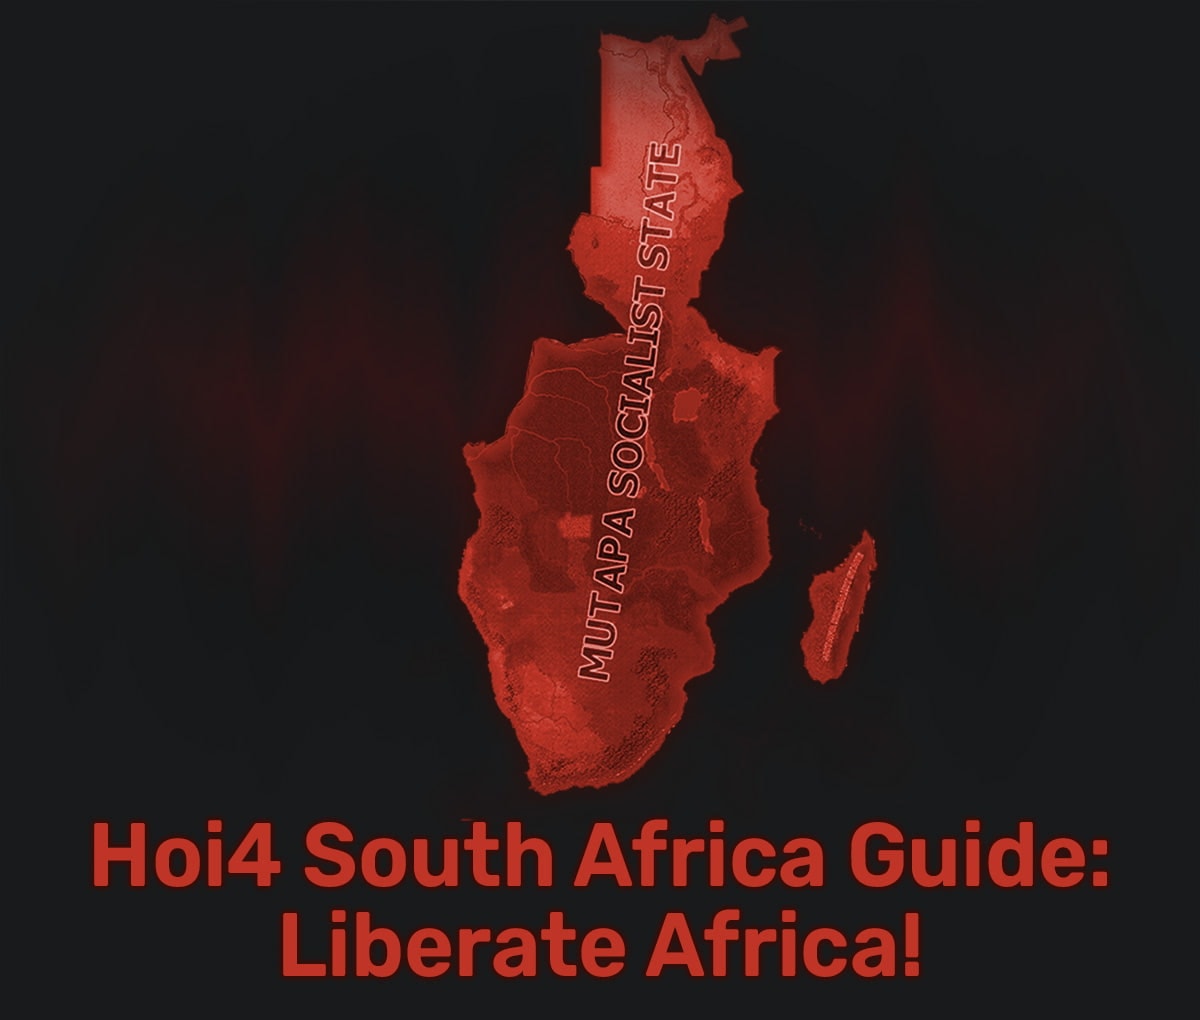 Ma of mutapa socialist state in Hoi4 South Africa guide